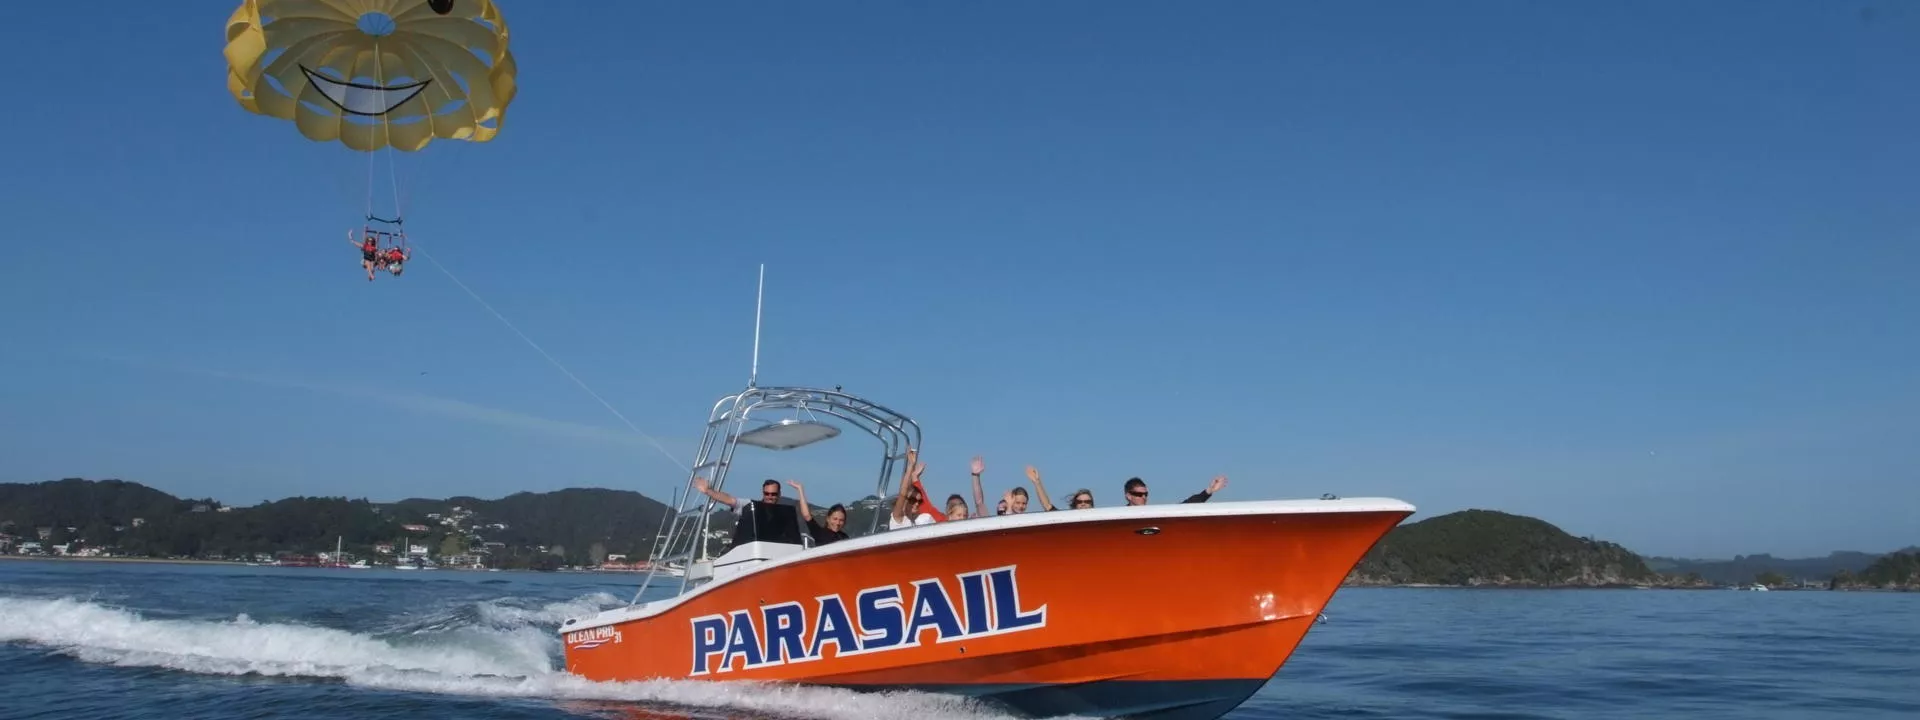 Bay of Islands Parasail in New Zealand, Australia and Oceania | Parasailing - Rated 1.1